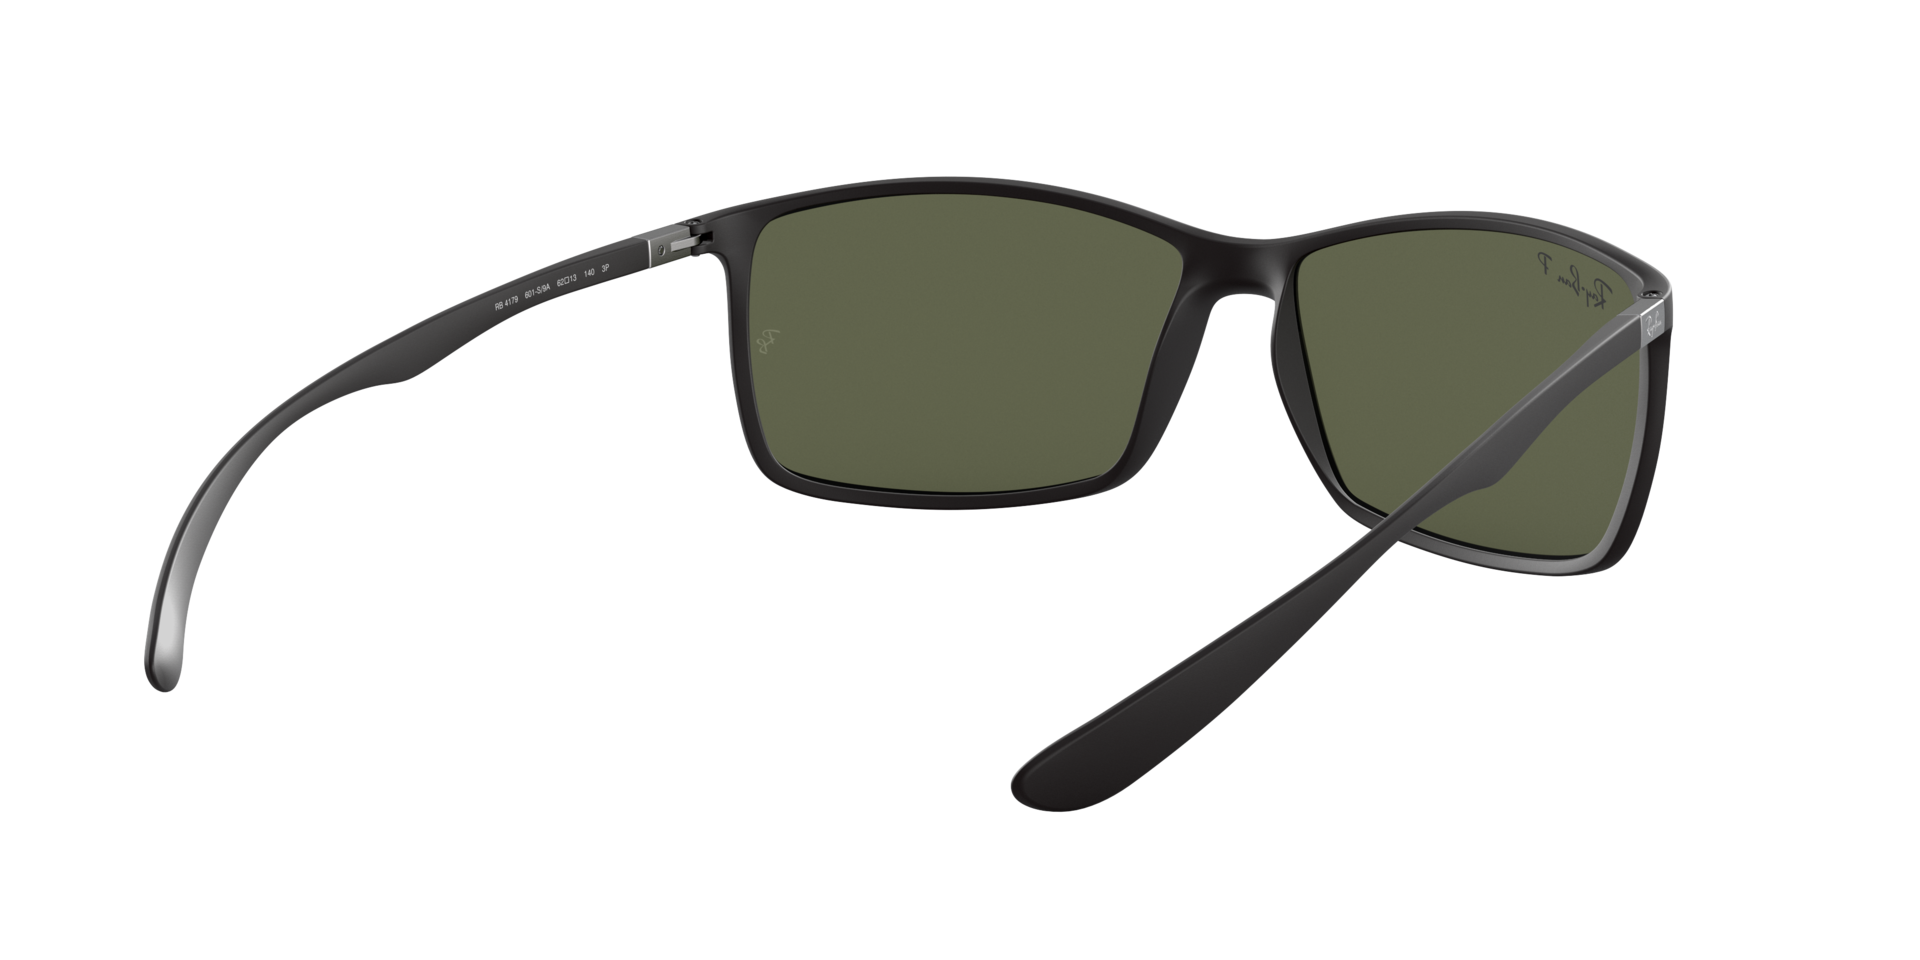 Buy Ray-Ban Rb4179 Sunglasses Online.